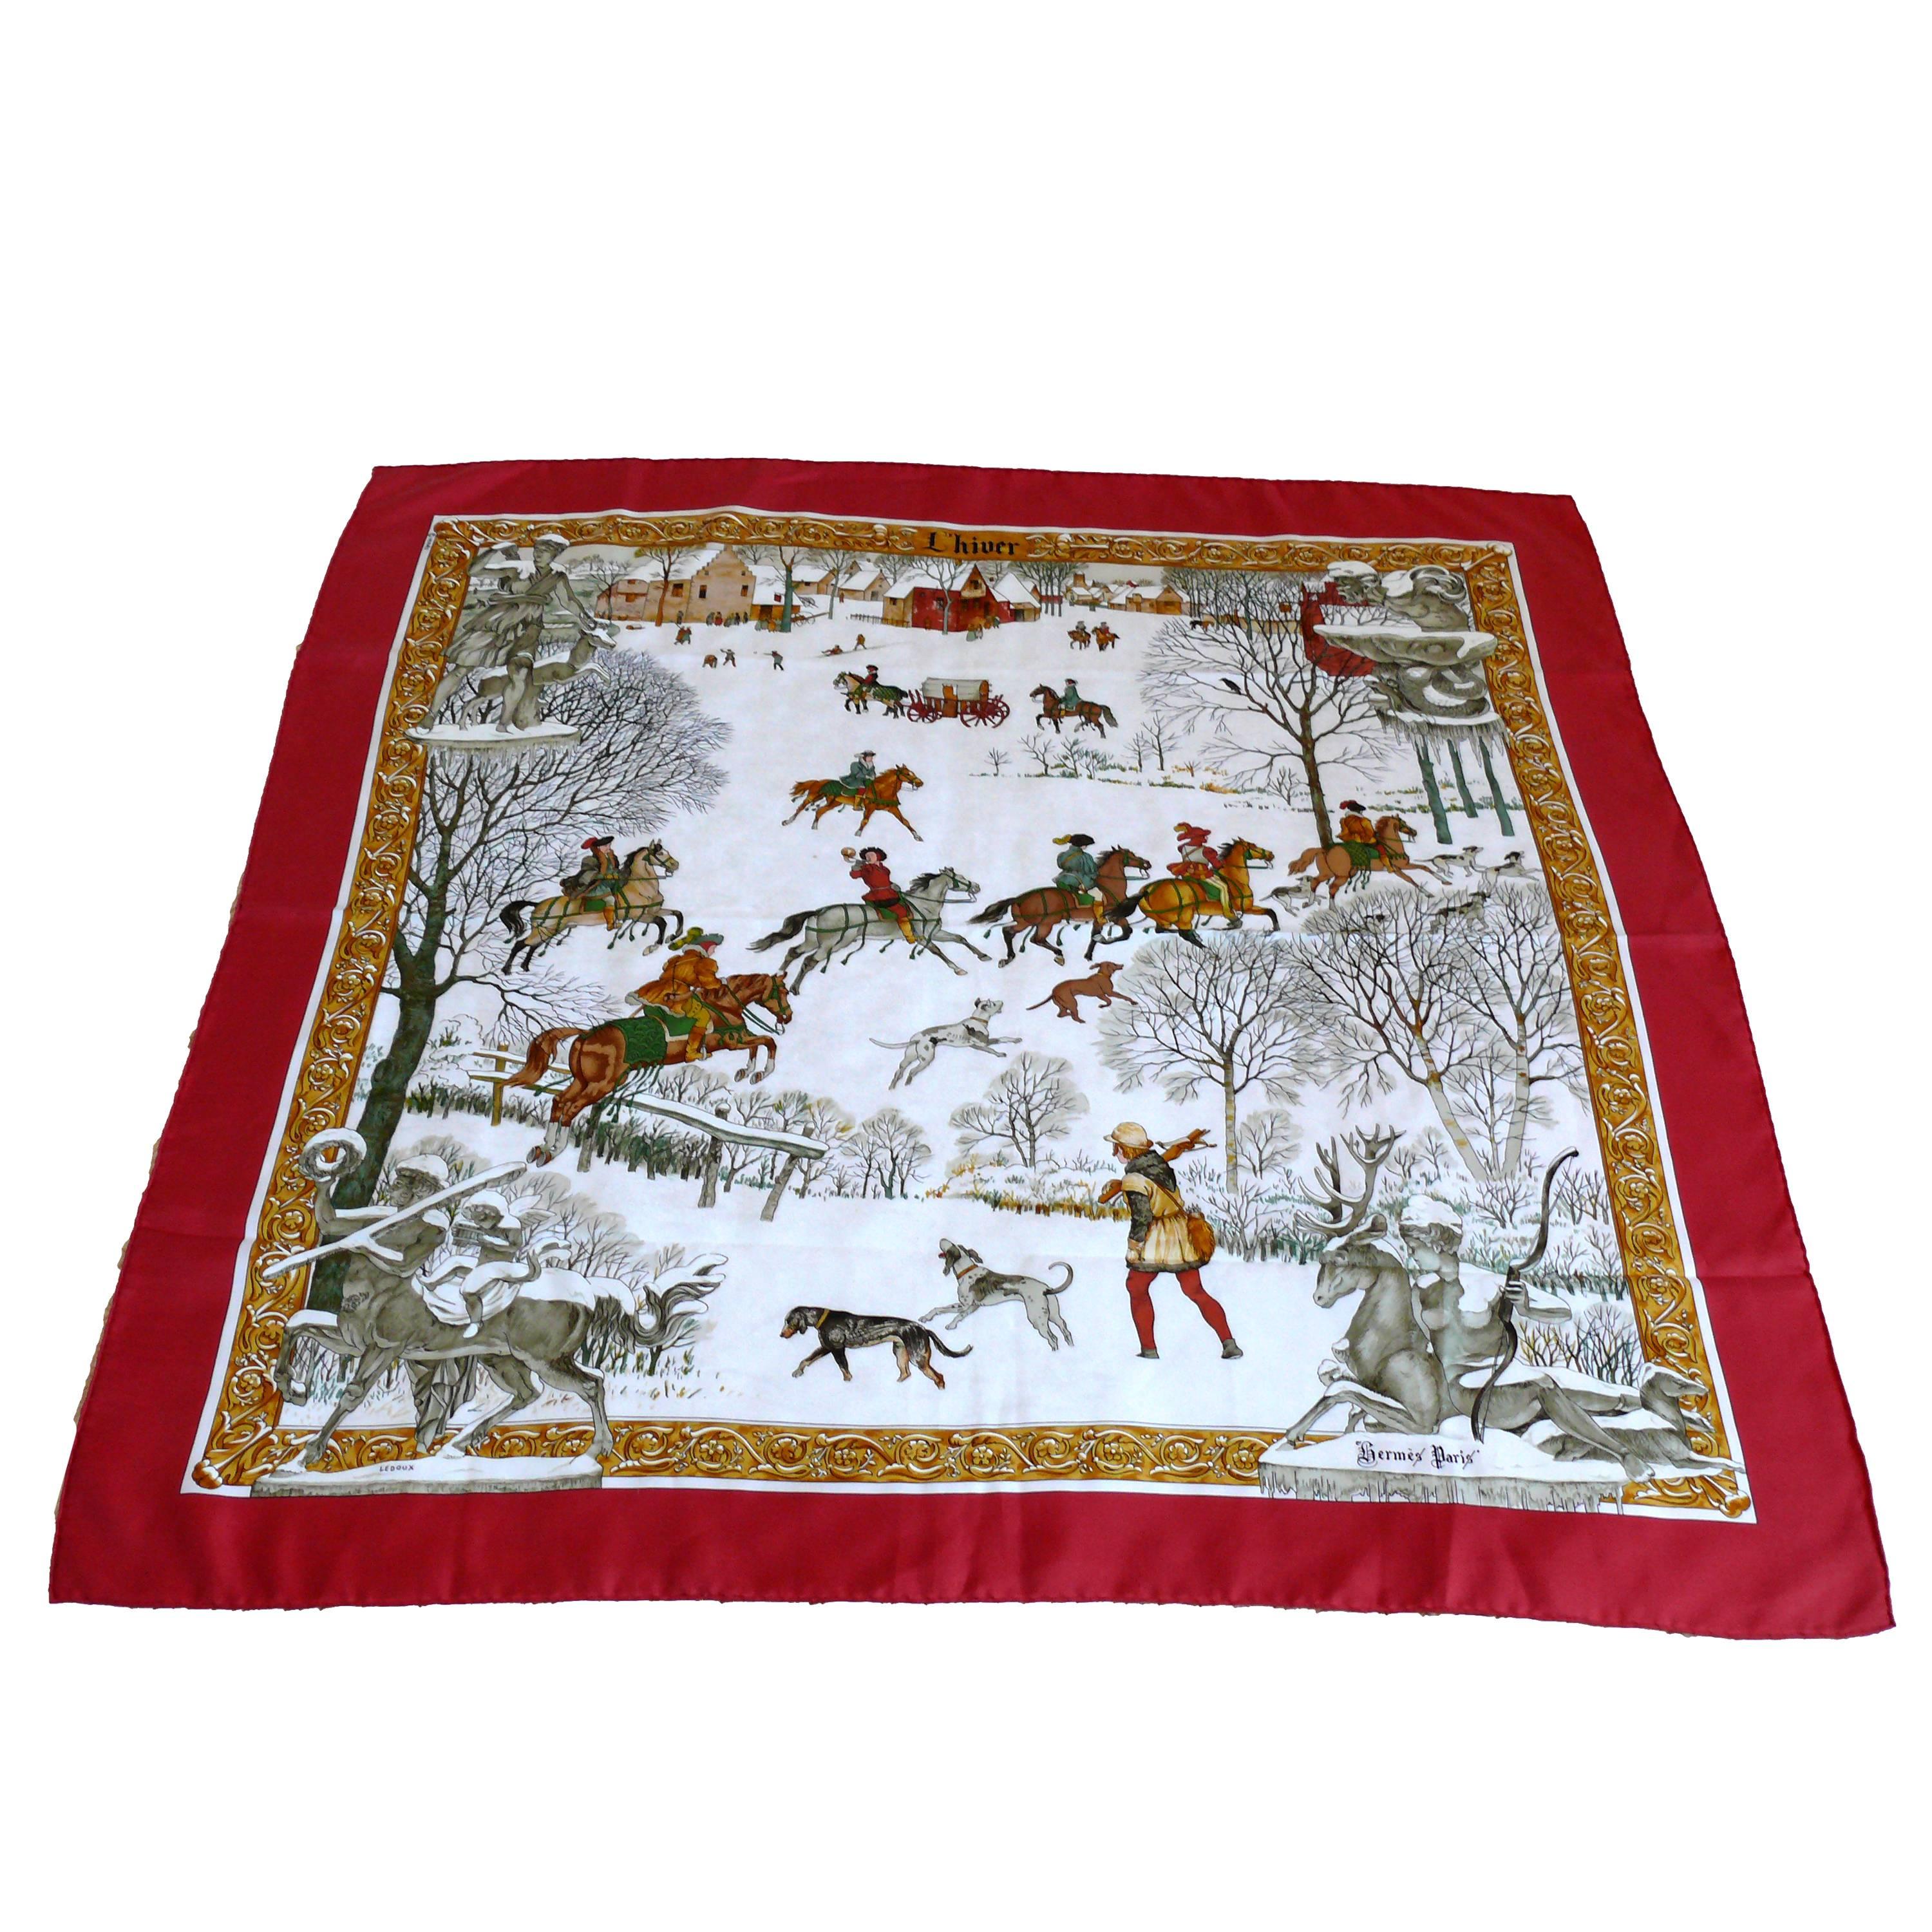 Hermes Silk Carre Scarf "L'Hiver" by Ledoux